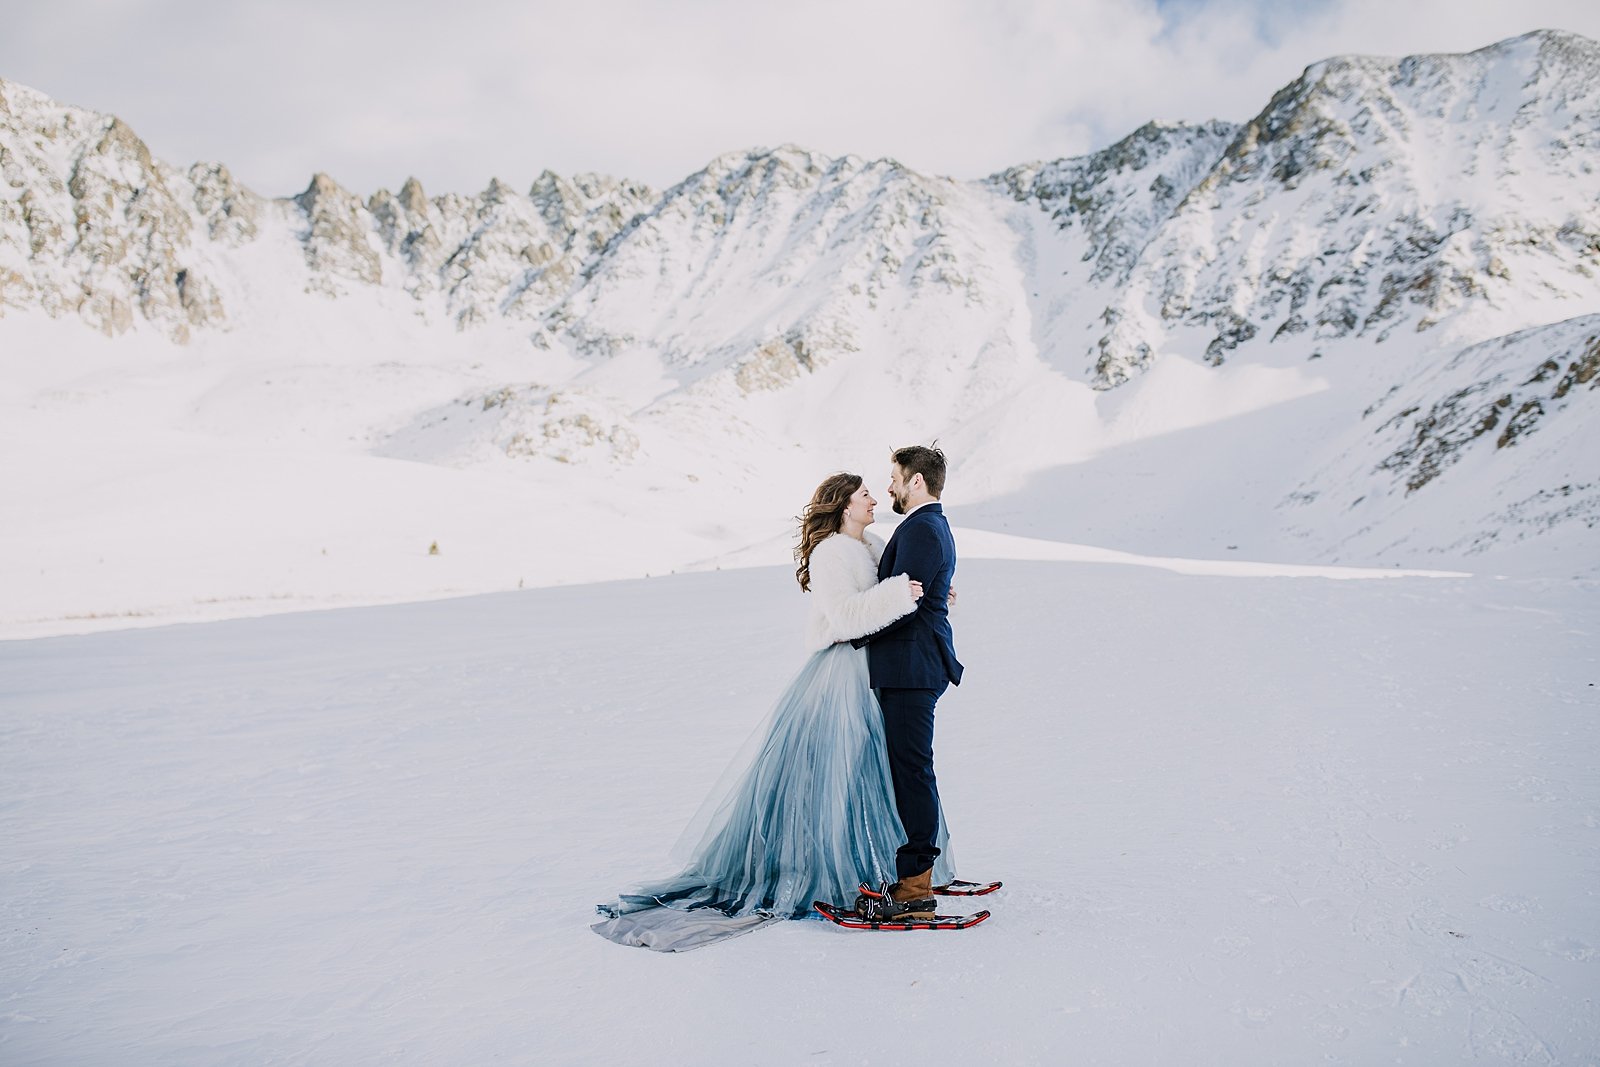 Bride and groom first dance, first dance in snowshoes, snowshoeing mayflower gulch, bride and groom embrace, winter landscape, colorado winter landscape, yukon charlies snowshoes